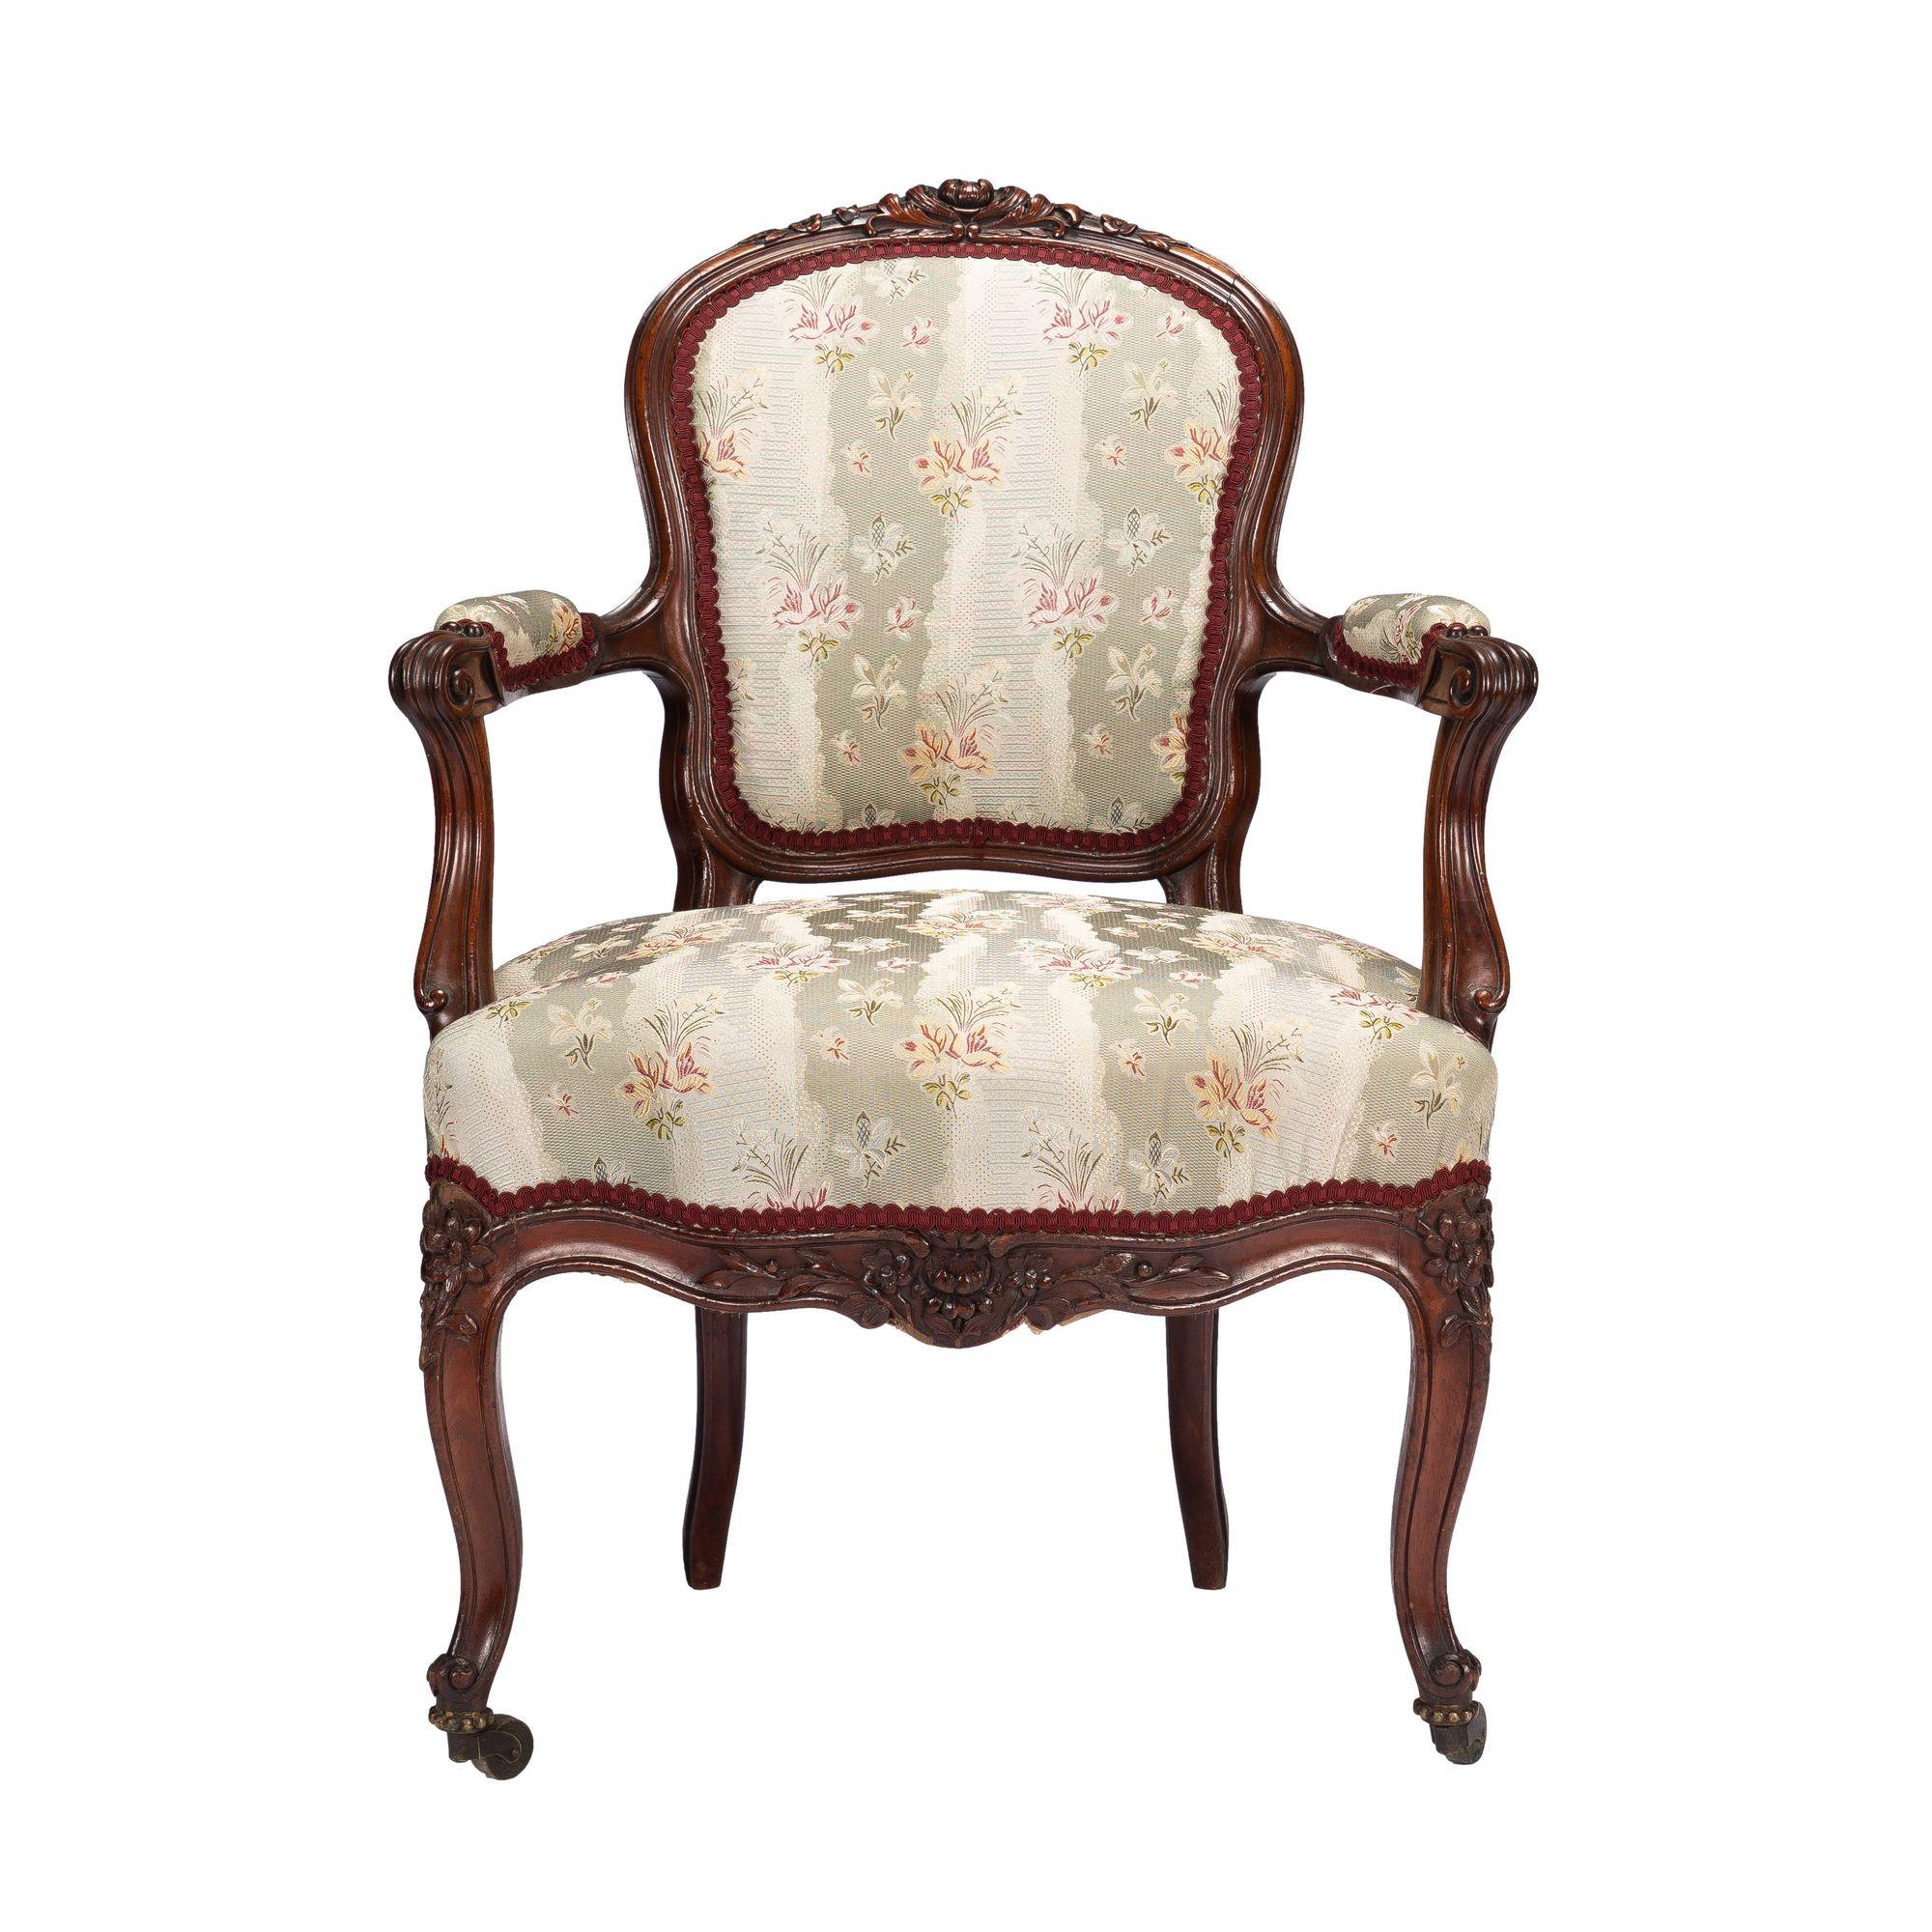 Louis Philippe Period walnut fauteuil, upholstered in silk brocade in the Louis XVl taste. Beautifully proportioned and carved with its cabriole legs terminating in their original castor feet. Accompanied by a paired footstool in matching silk